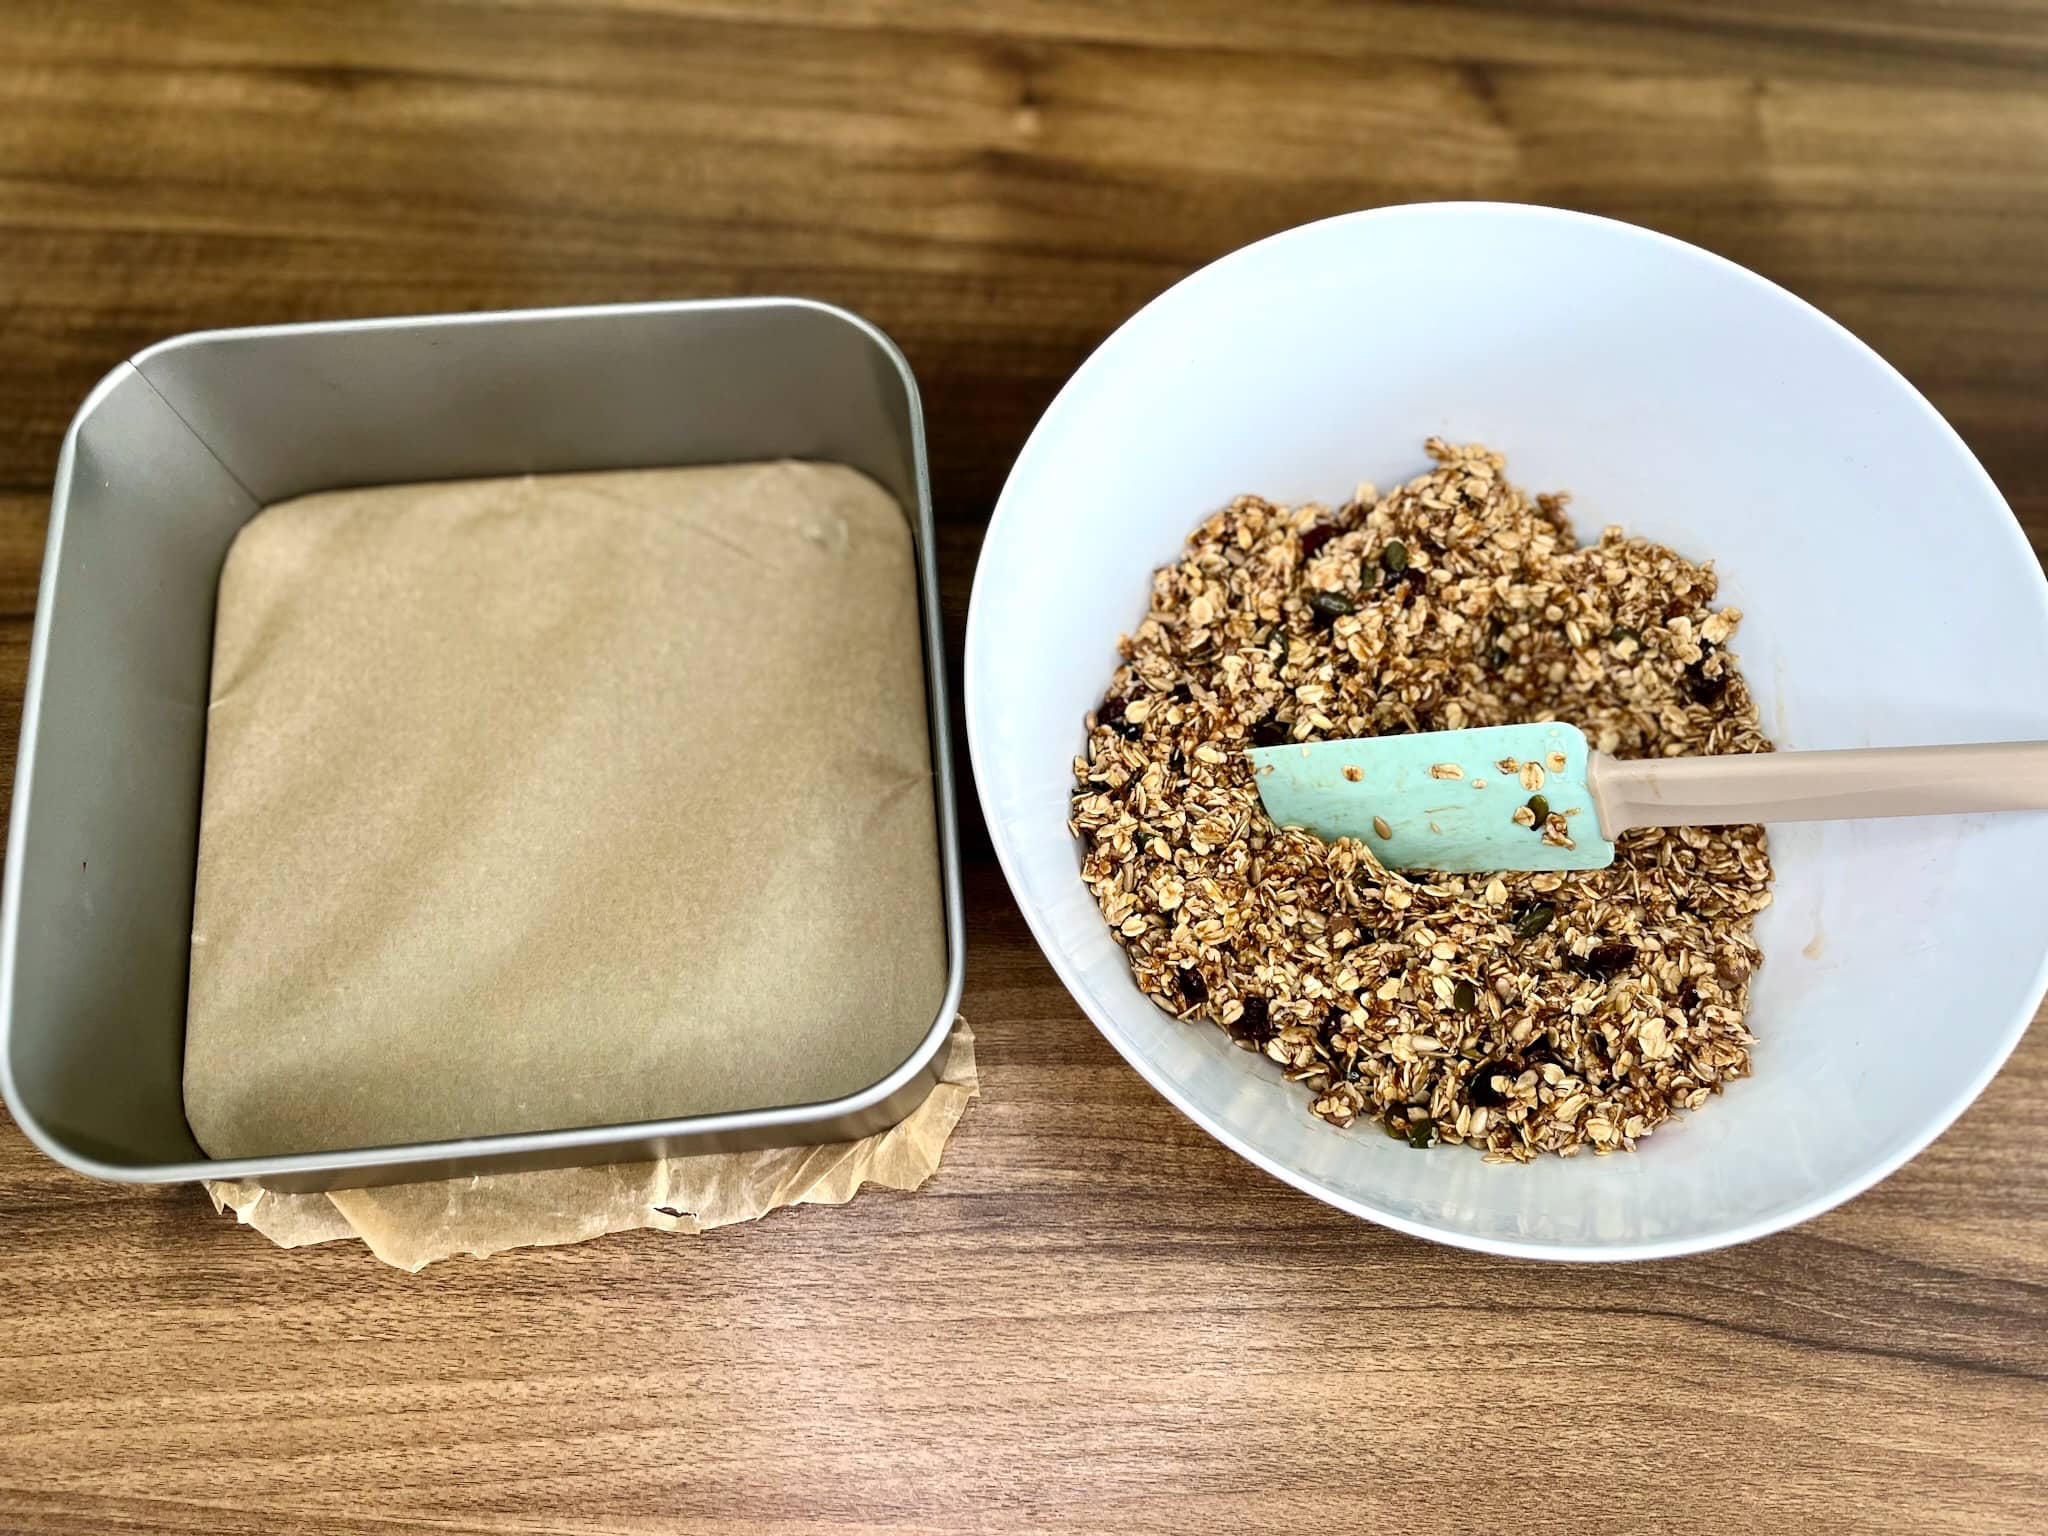 The muesli bar mixture is ready in a bowl, with the baking tray prepared